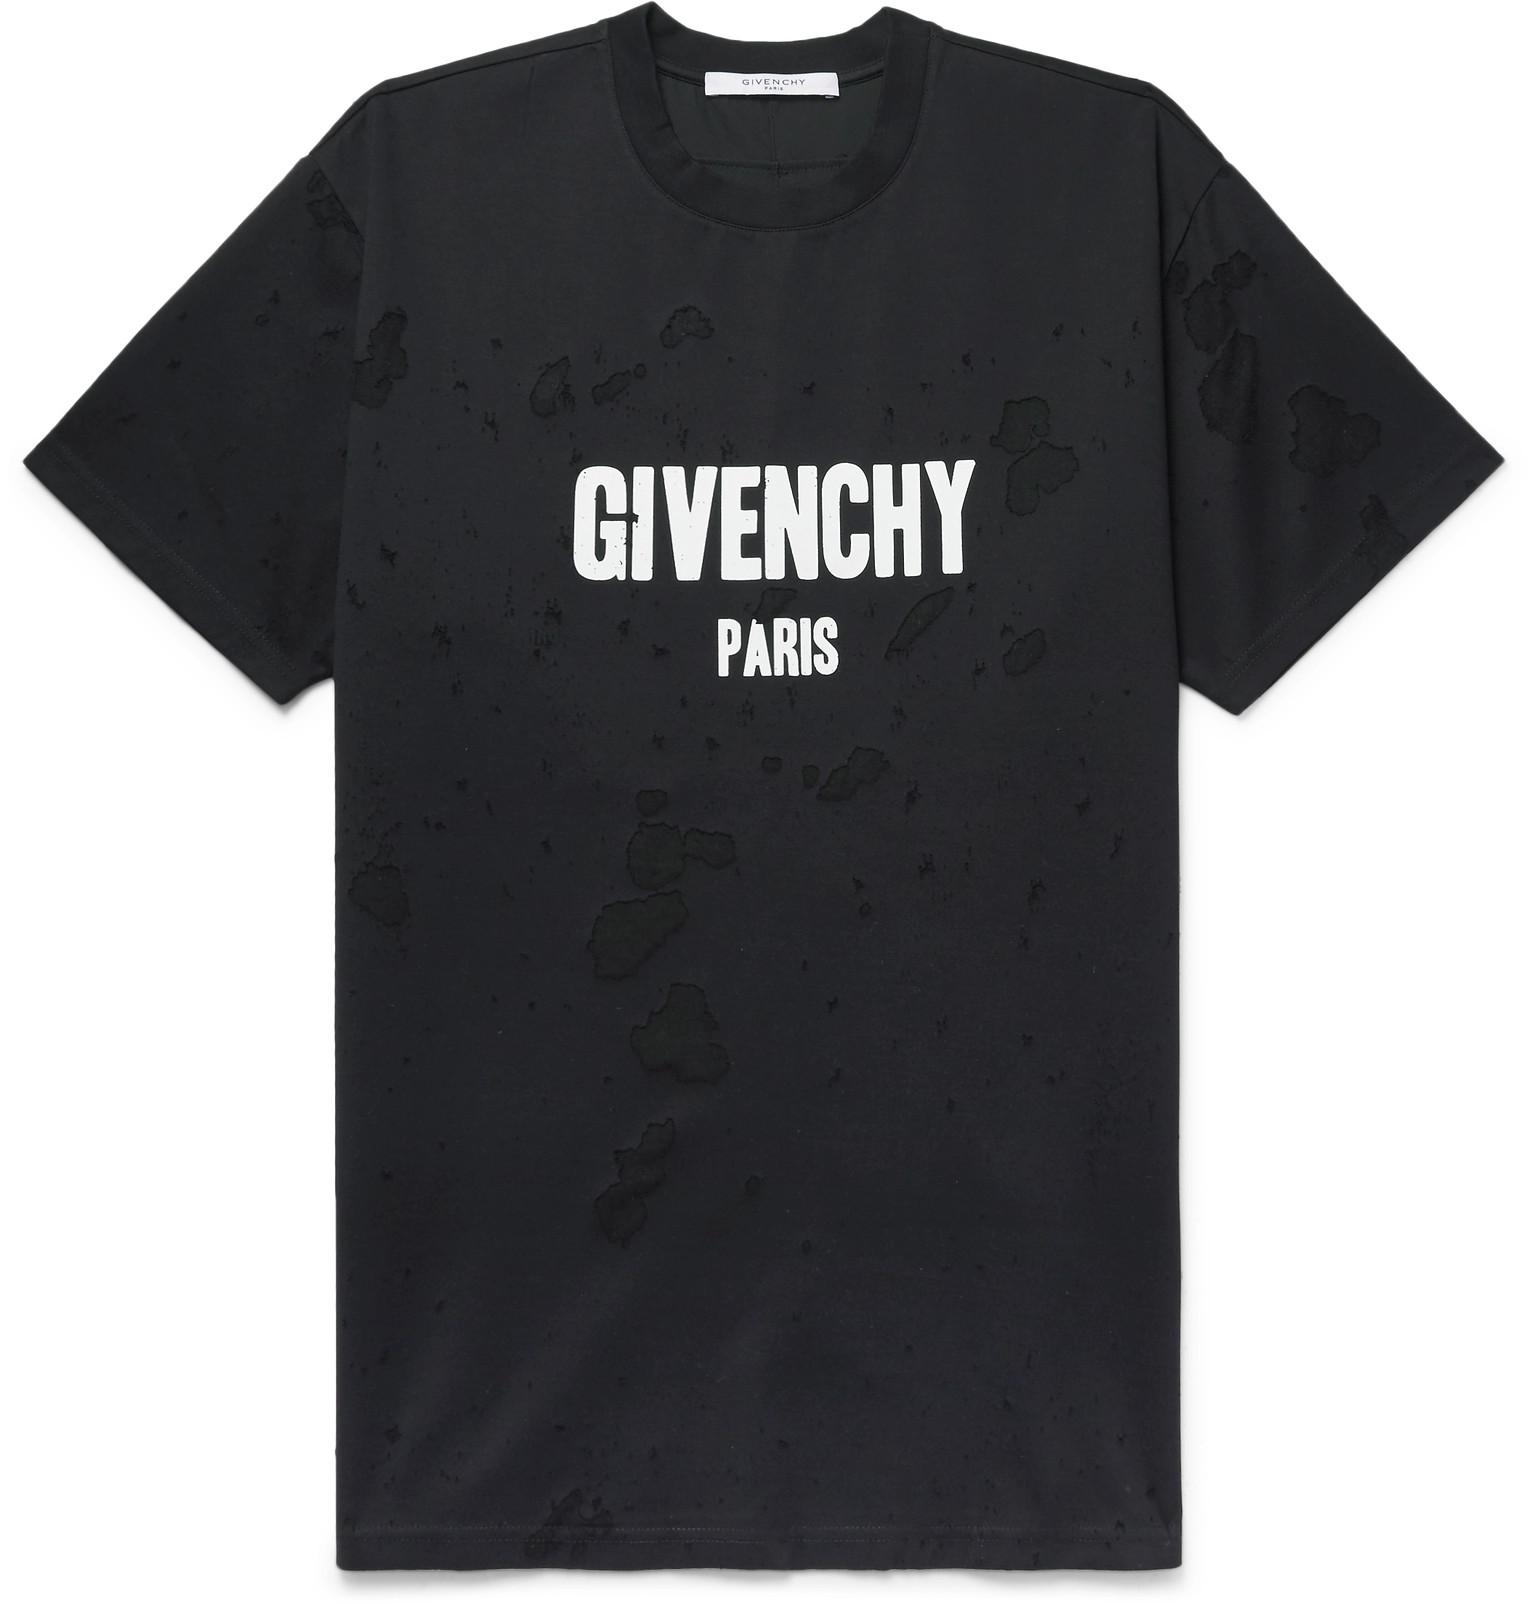 Givenchy Distressed Printed Cotton-jersey T-shirt in Black for Men - Lyst